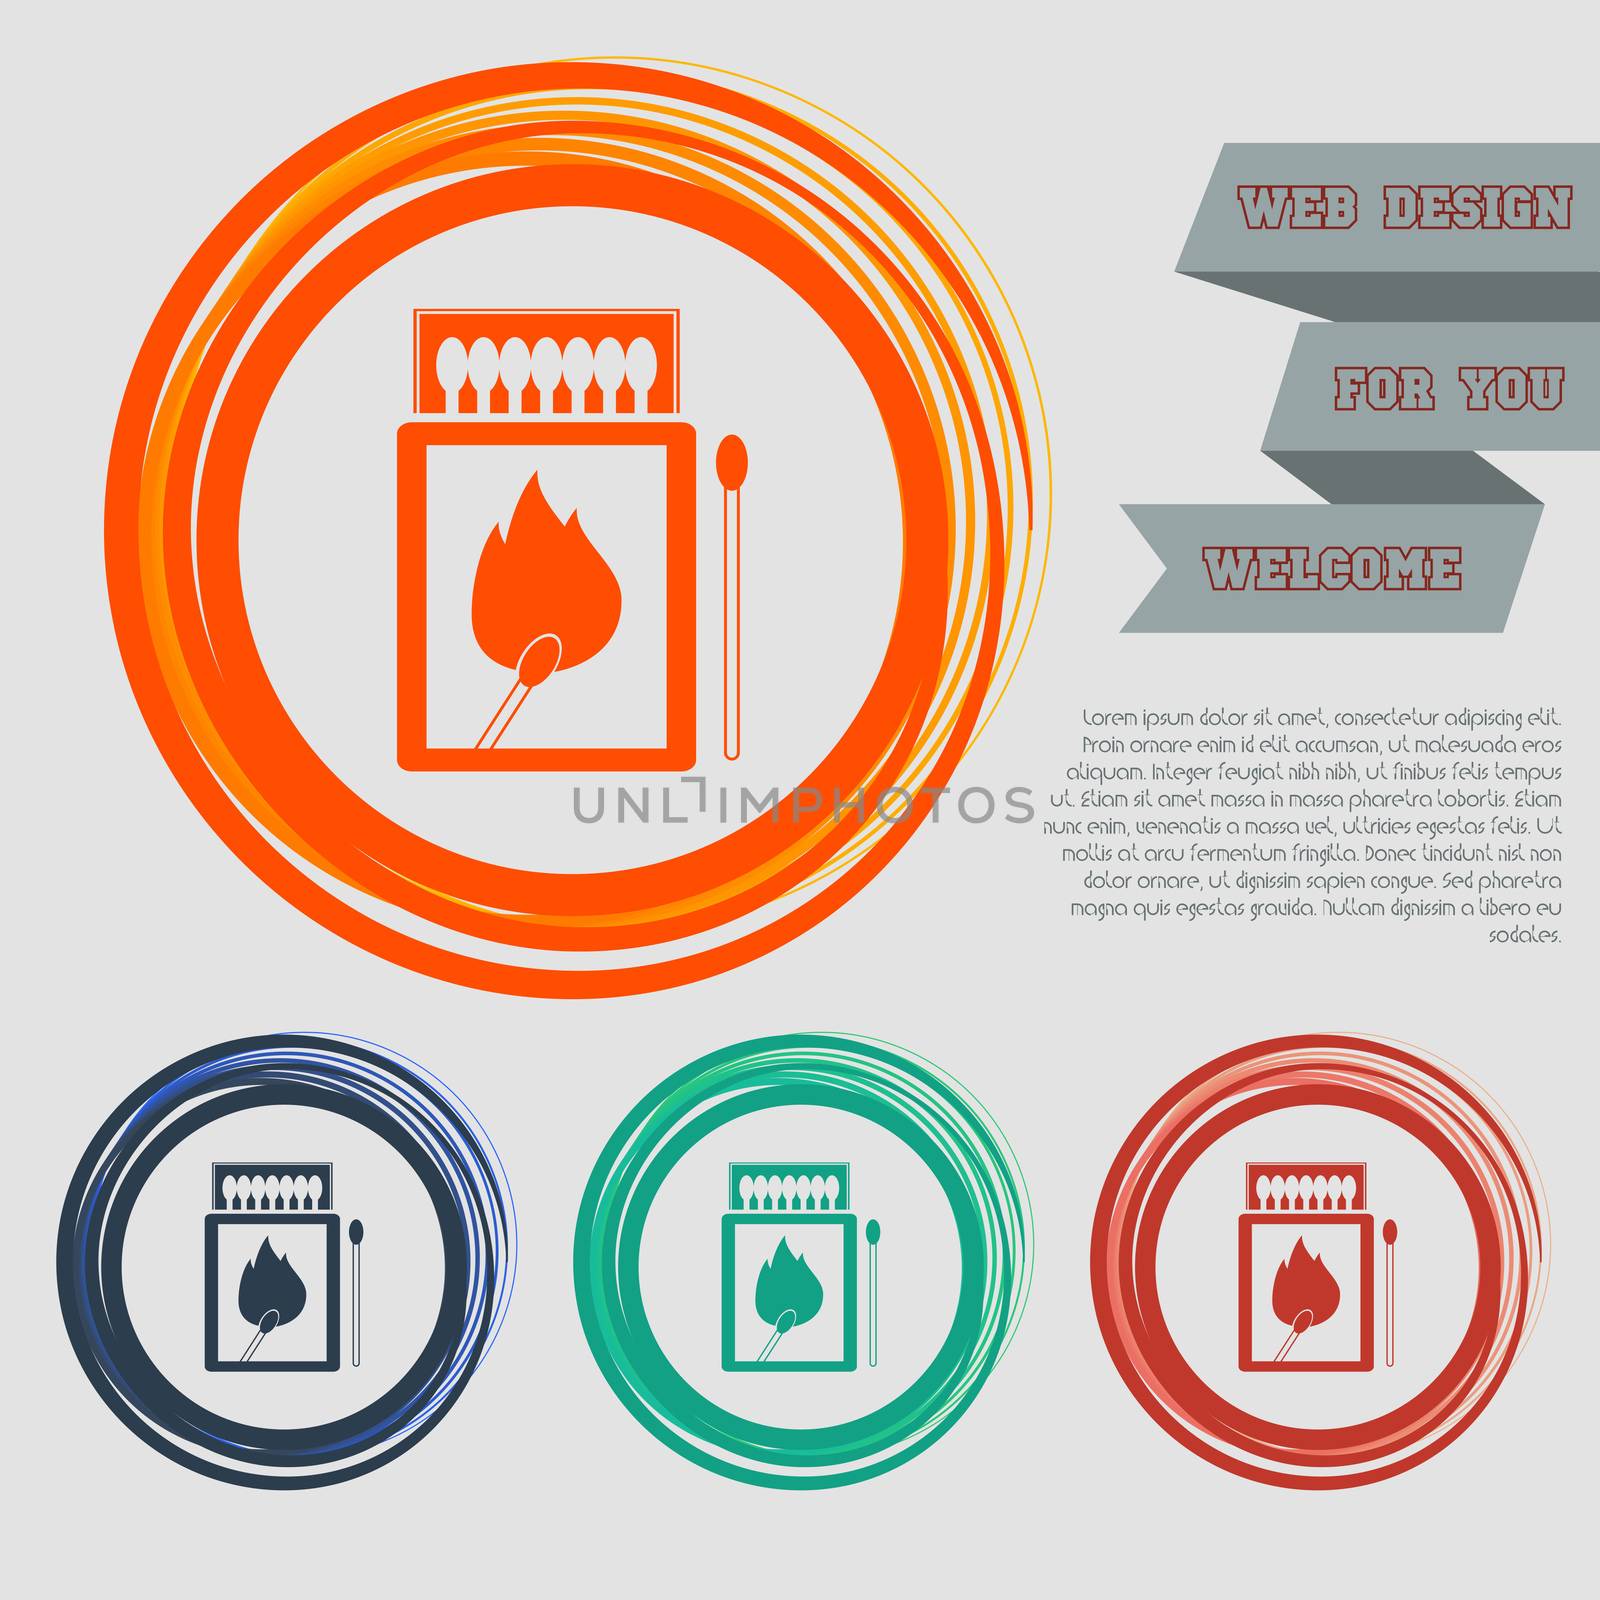 matchbox and matches icon on the red, blue, green, orange buttons for your website and design with space text. illustration